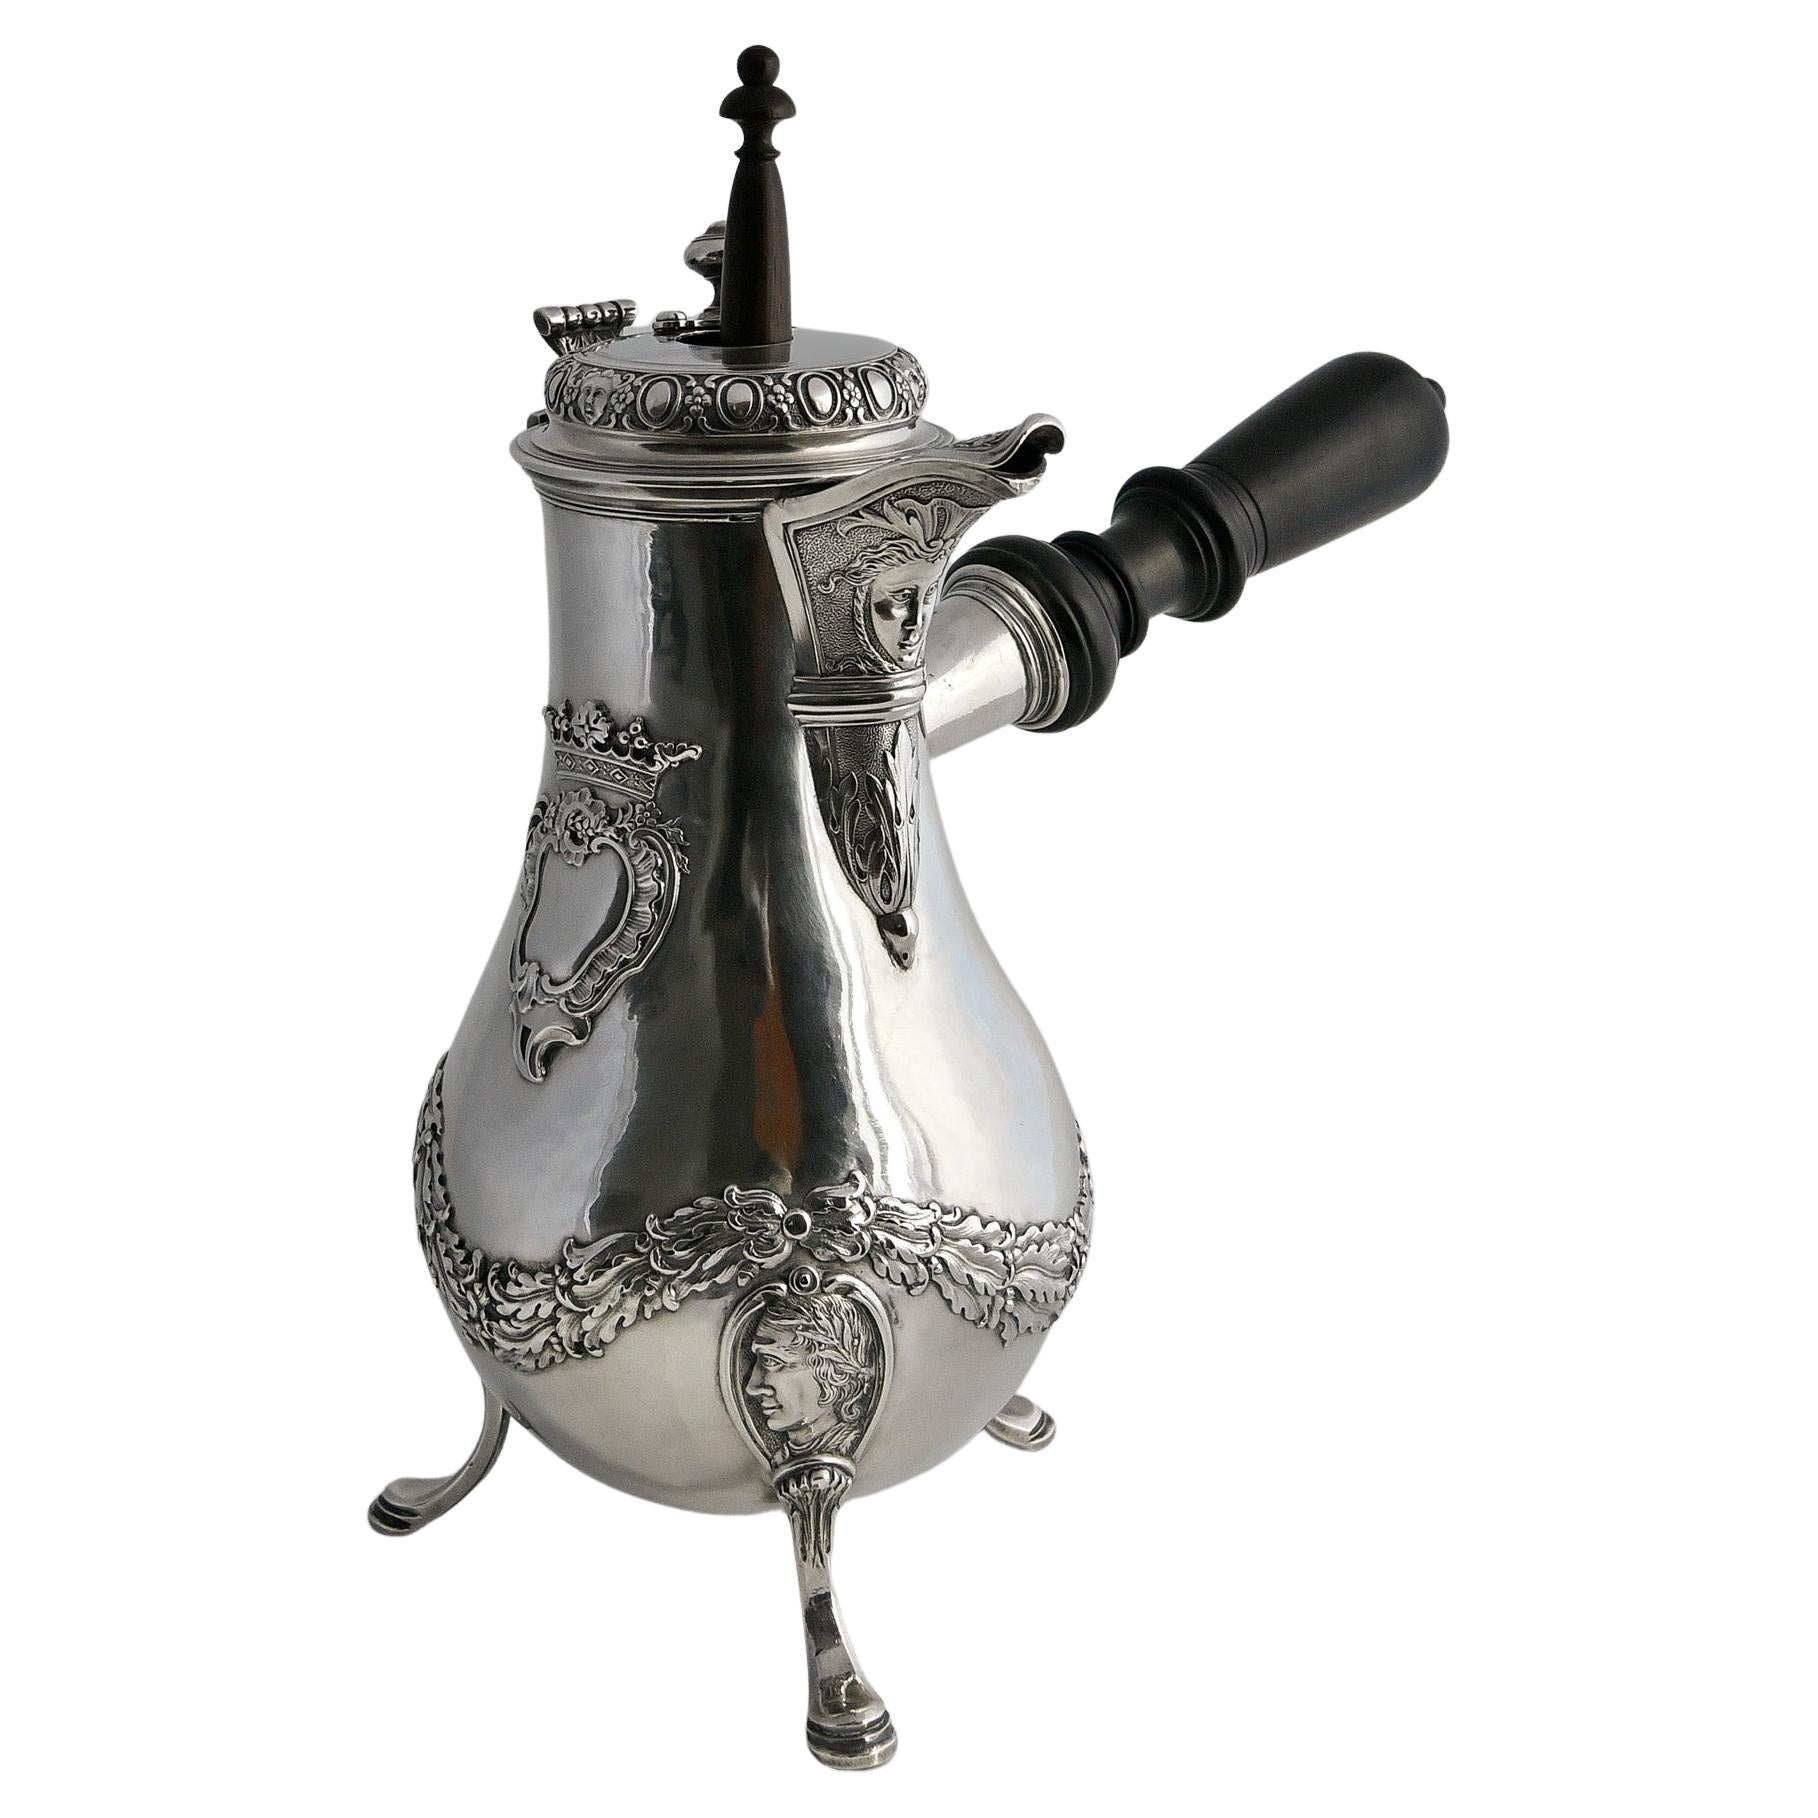 Chocolatiere in solid silver. Silver content 950. 
Particularly beautiful molding on three feet, wall with garland decoration, fine potrait medallions on the legs and elaborated heraldic cartouche. The wooden handle can be unscrewed and also has a